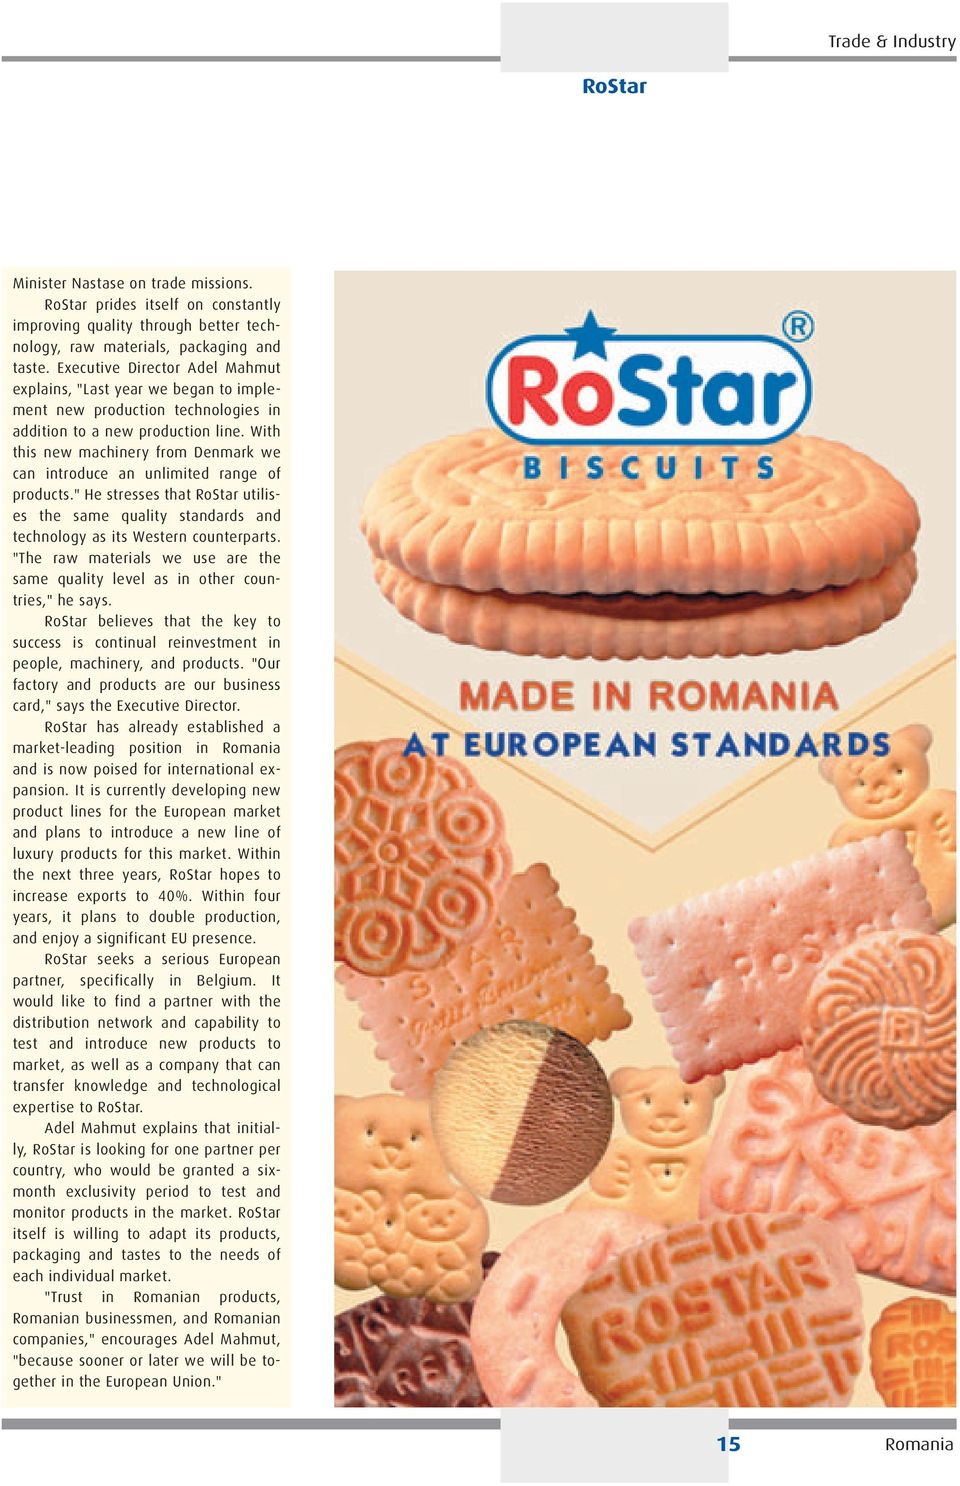 With this new machinery from Denmark we can introduce an unlimited range of products." He stresses that RoStar utilises the same quality standards and technology as its Western counterparts.